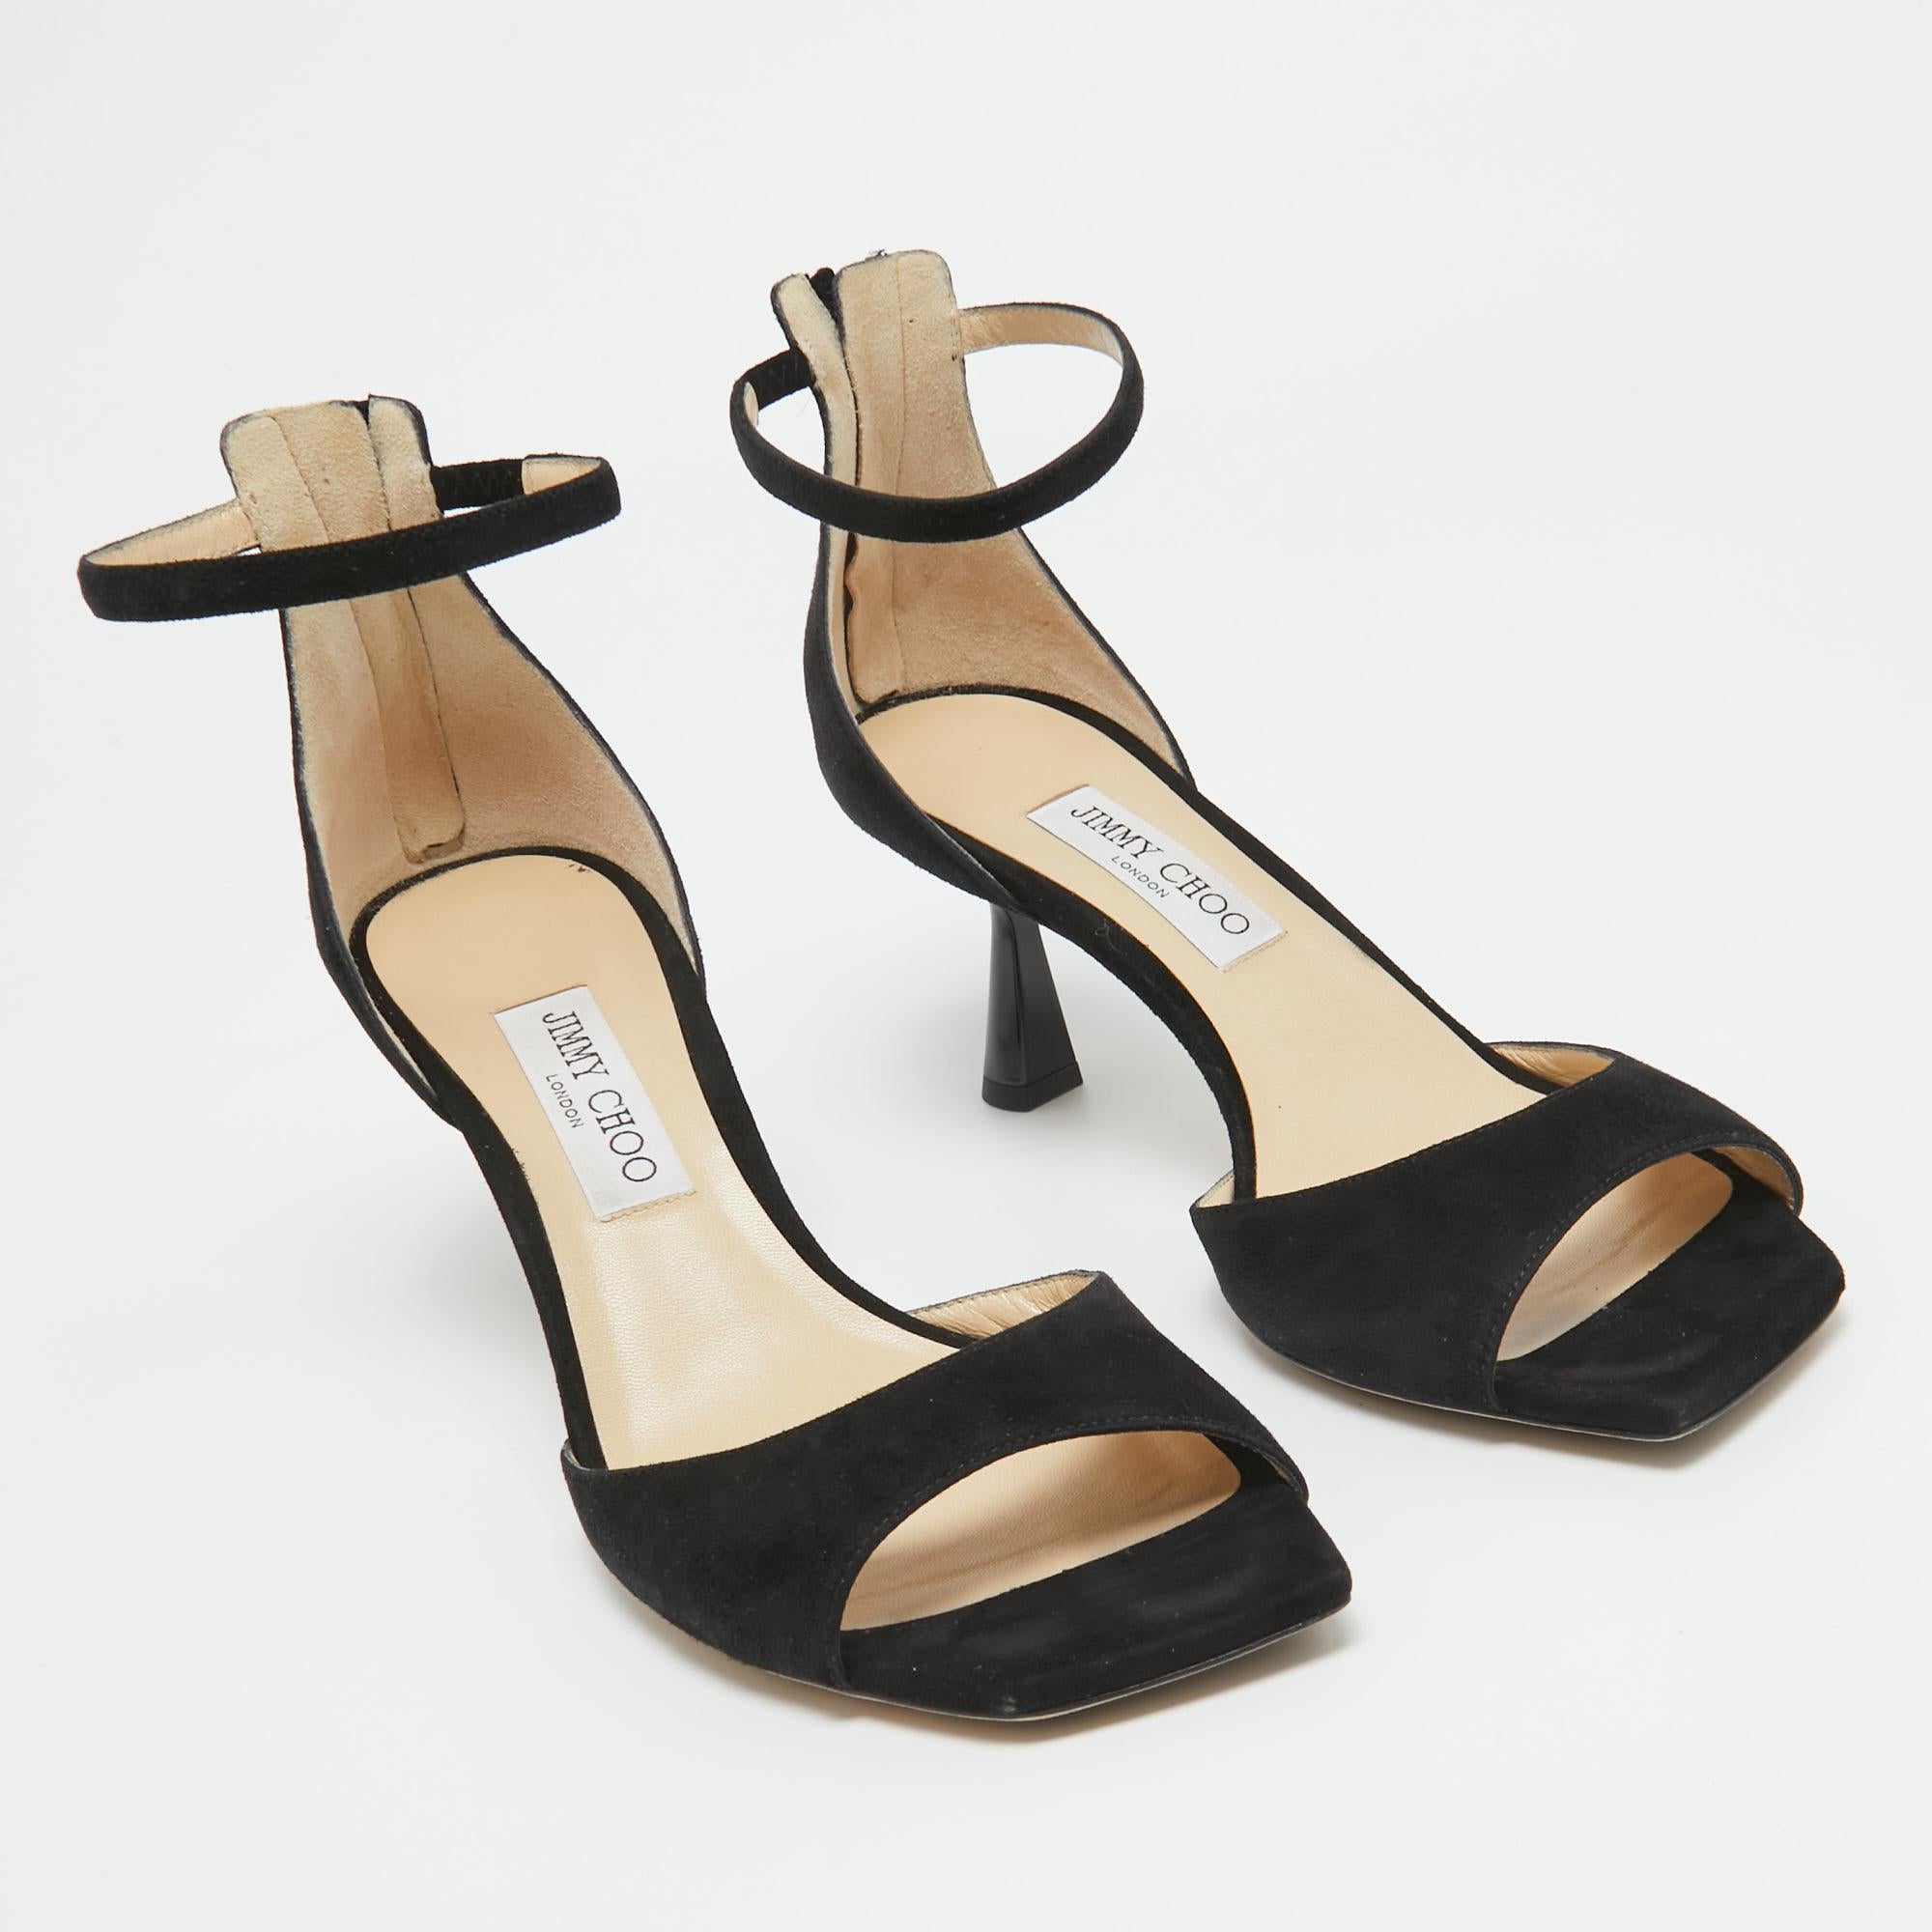 Jimmy Choo Black Suede Reon Sandals Size 41 For Sale 1